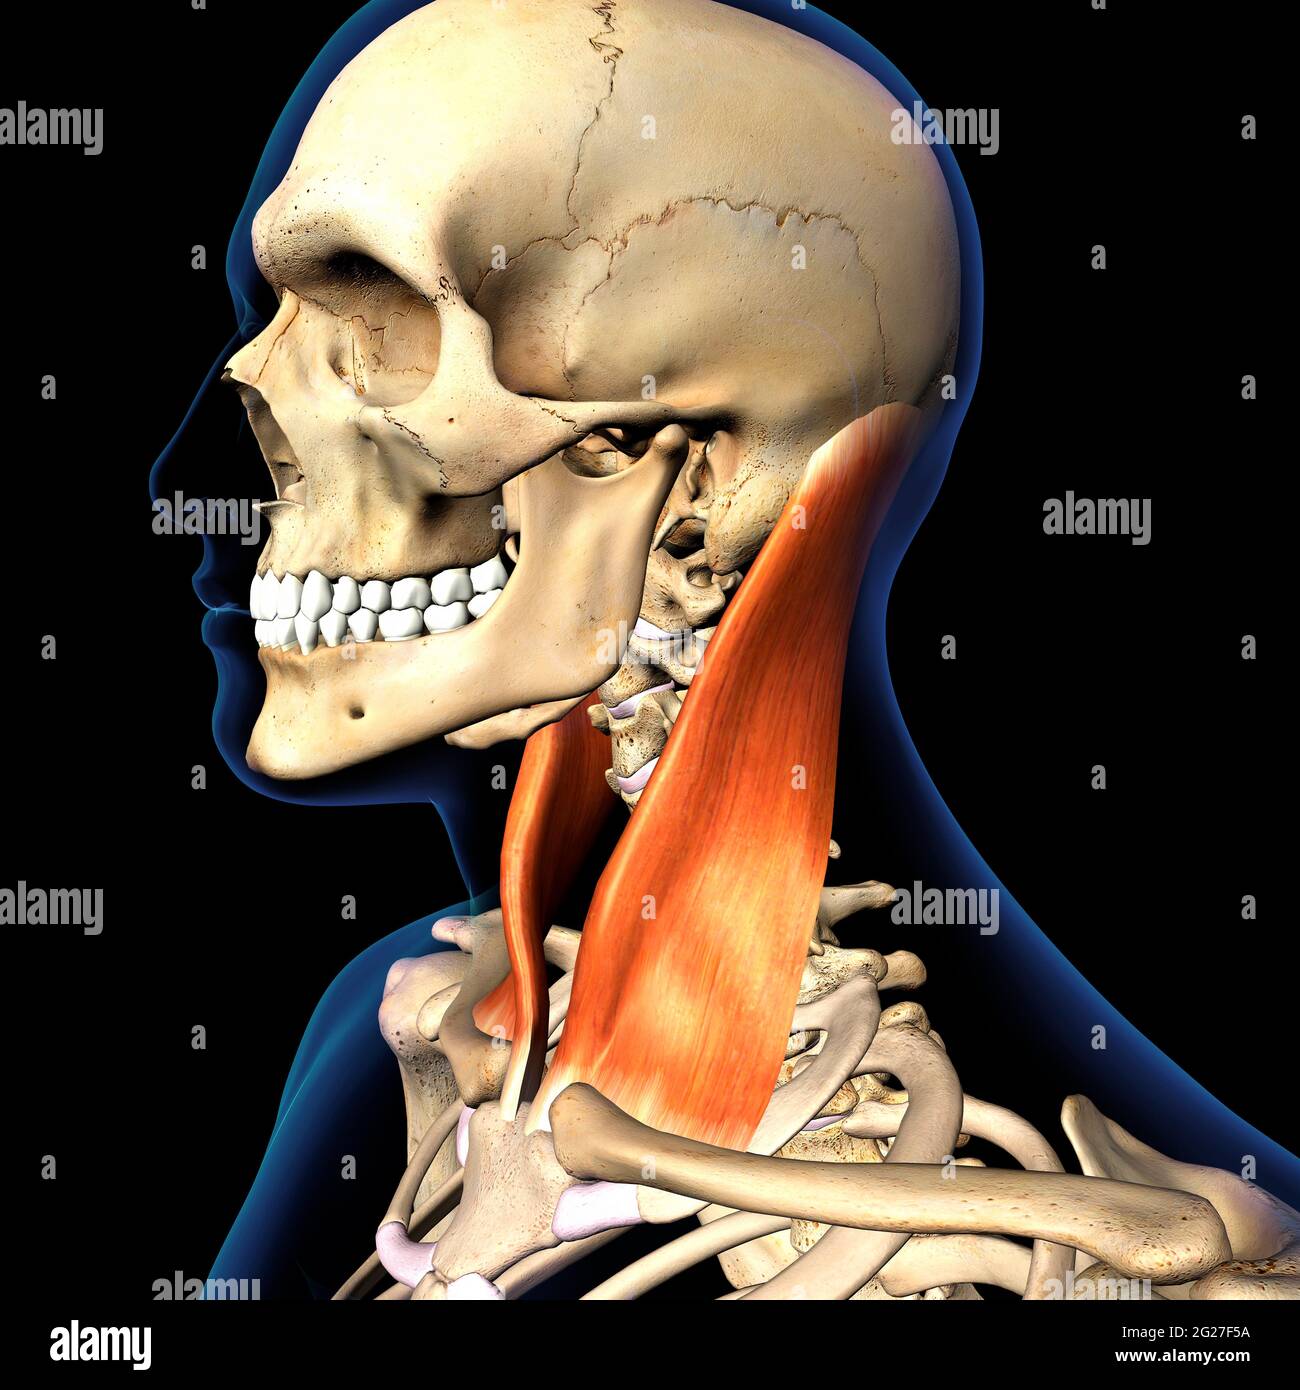 The Sternocleidomastoid neck muscle isolated within skeletal system, on black background. Stock Photo